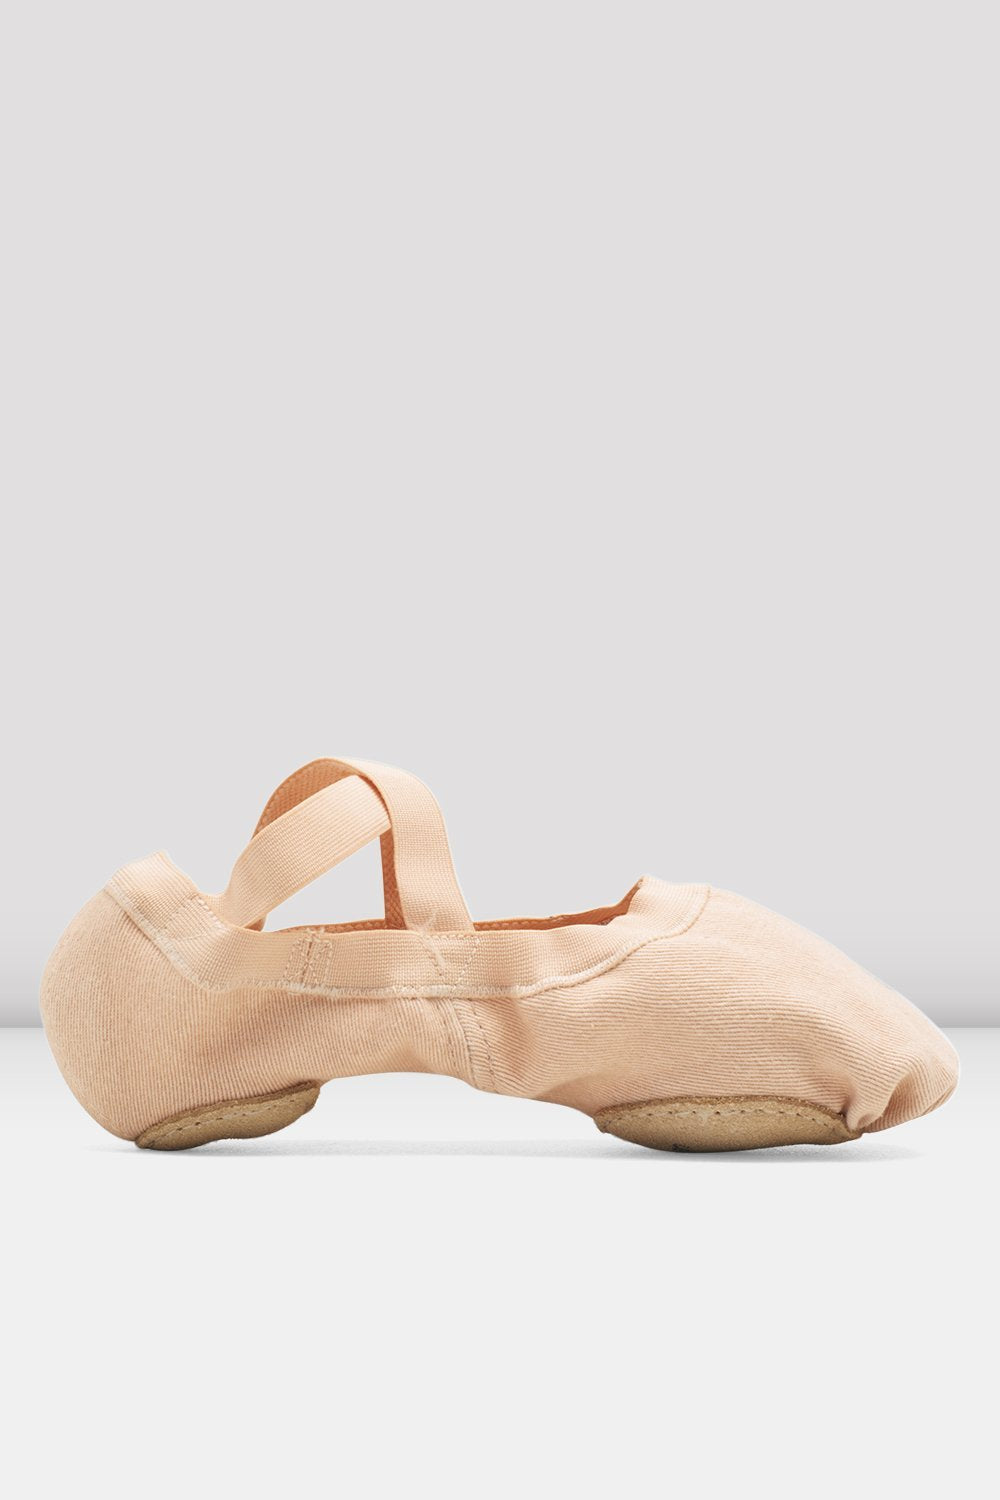 Adult Synchrony Ballet Shoe (Variety of Colors)